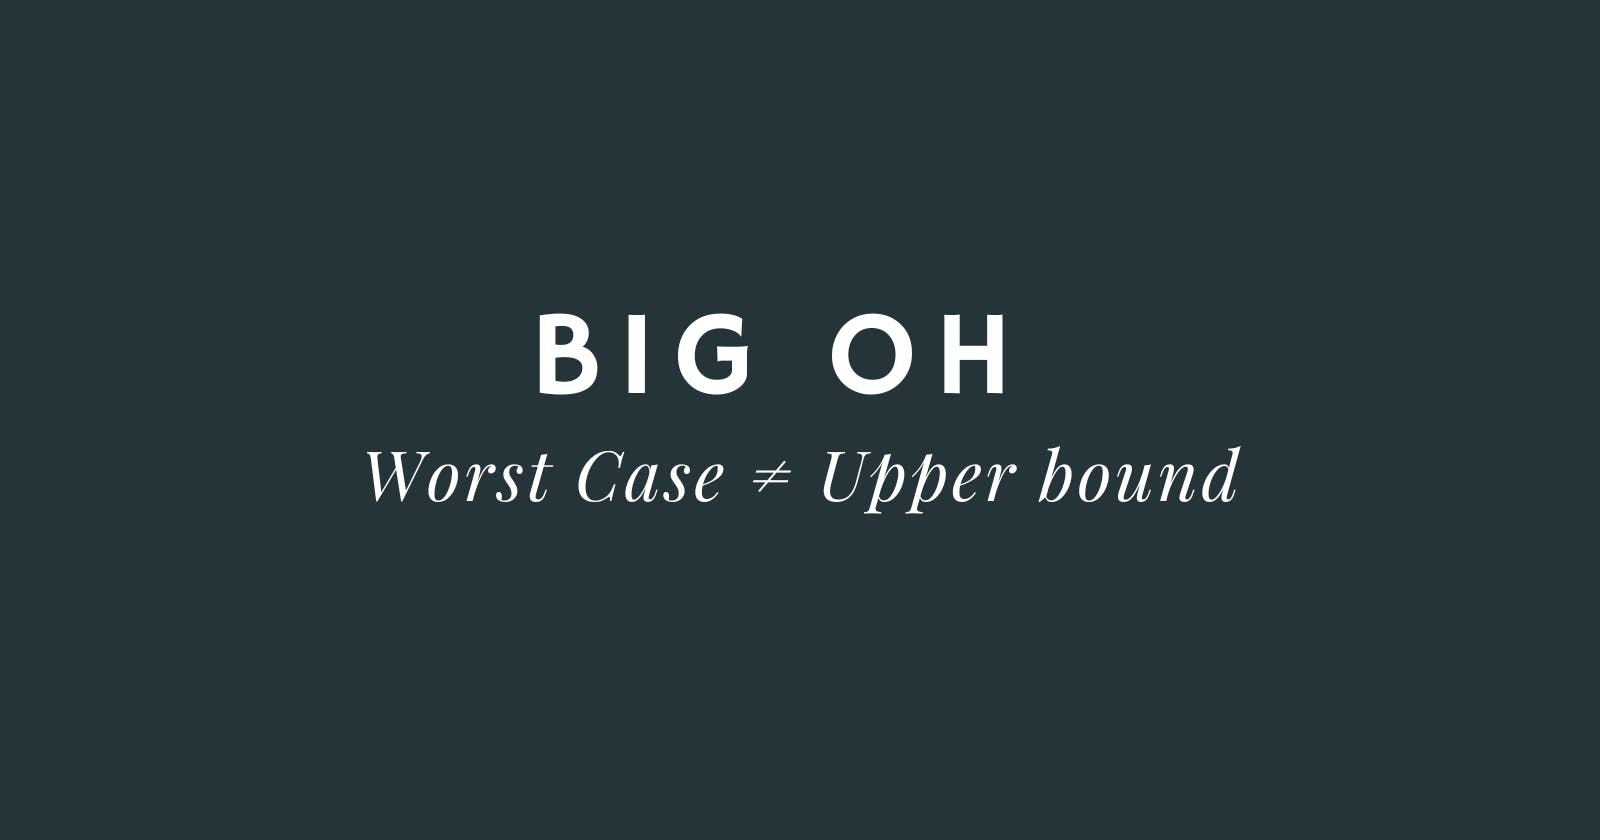 No, Big O notation is not equivalent  to saying "worst case scenario"